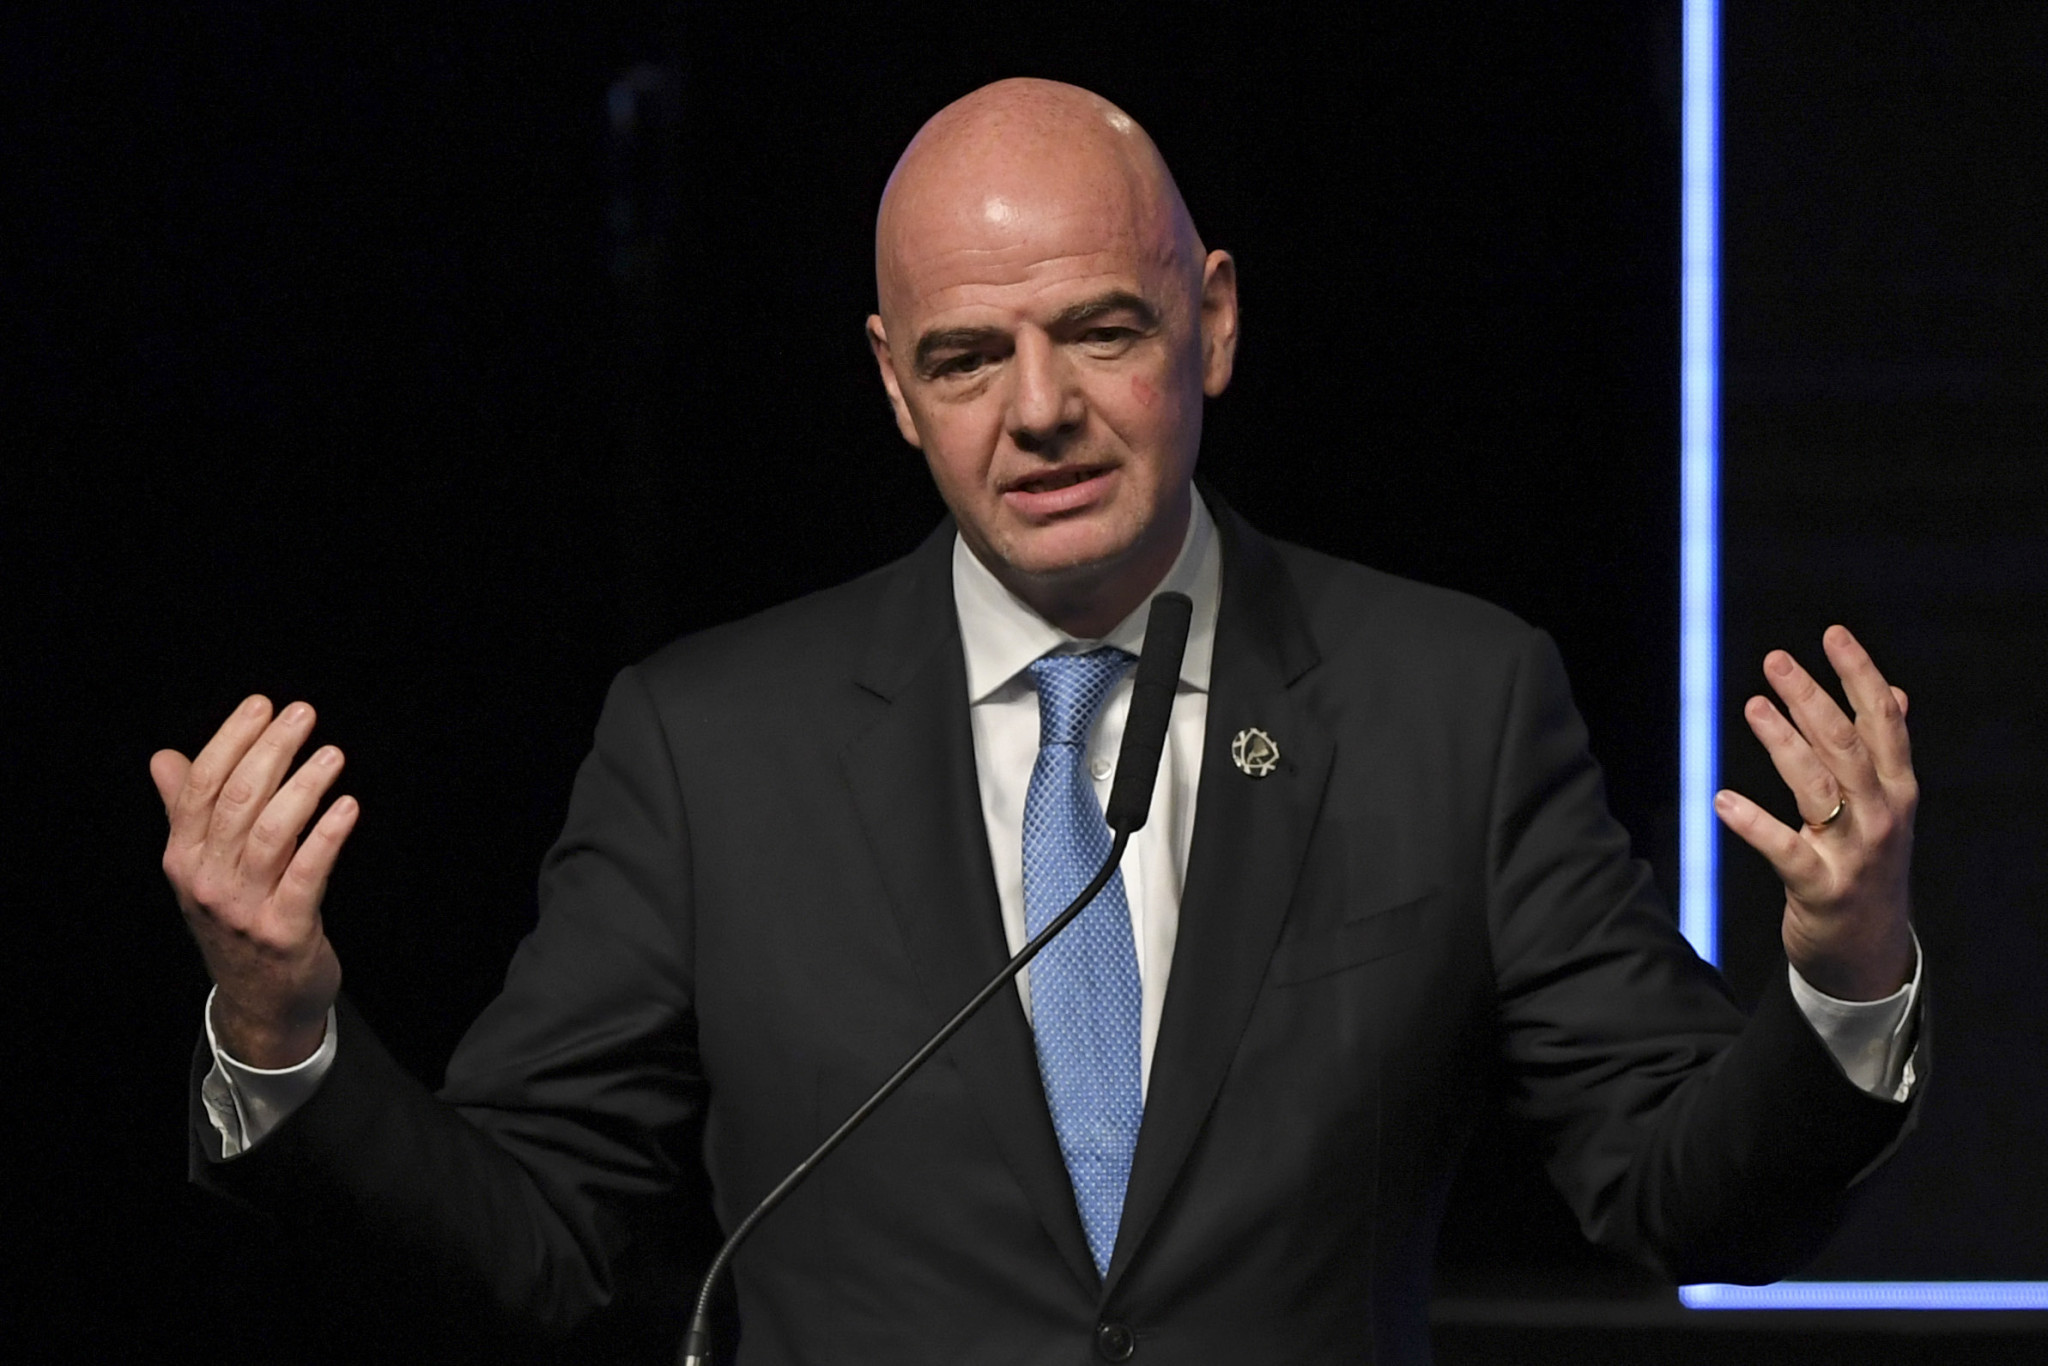 Infantino accused of undermining Morocco bid for 2026 FIFA World Cup